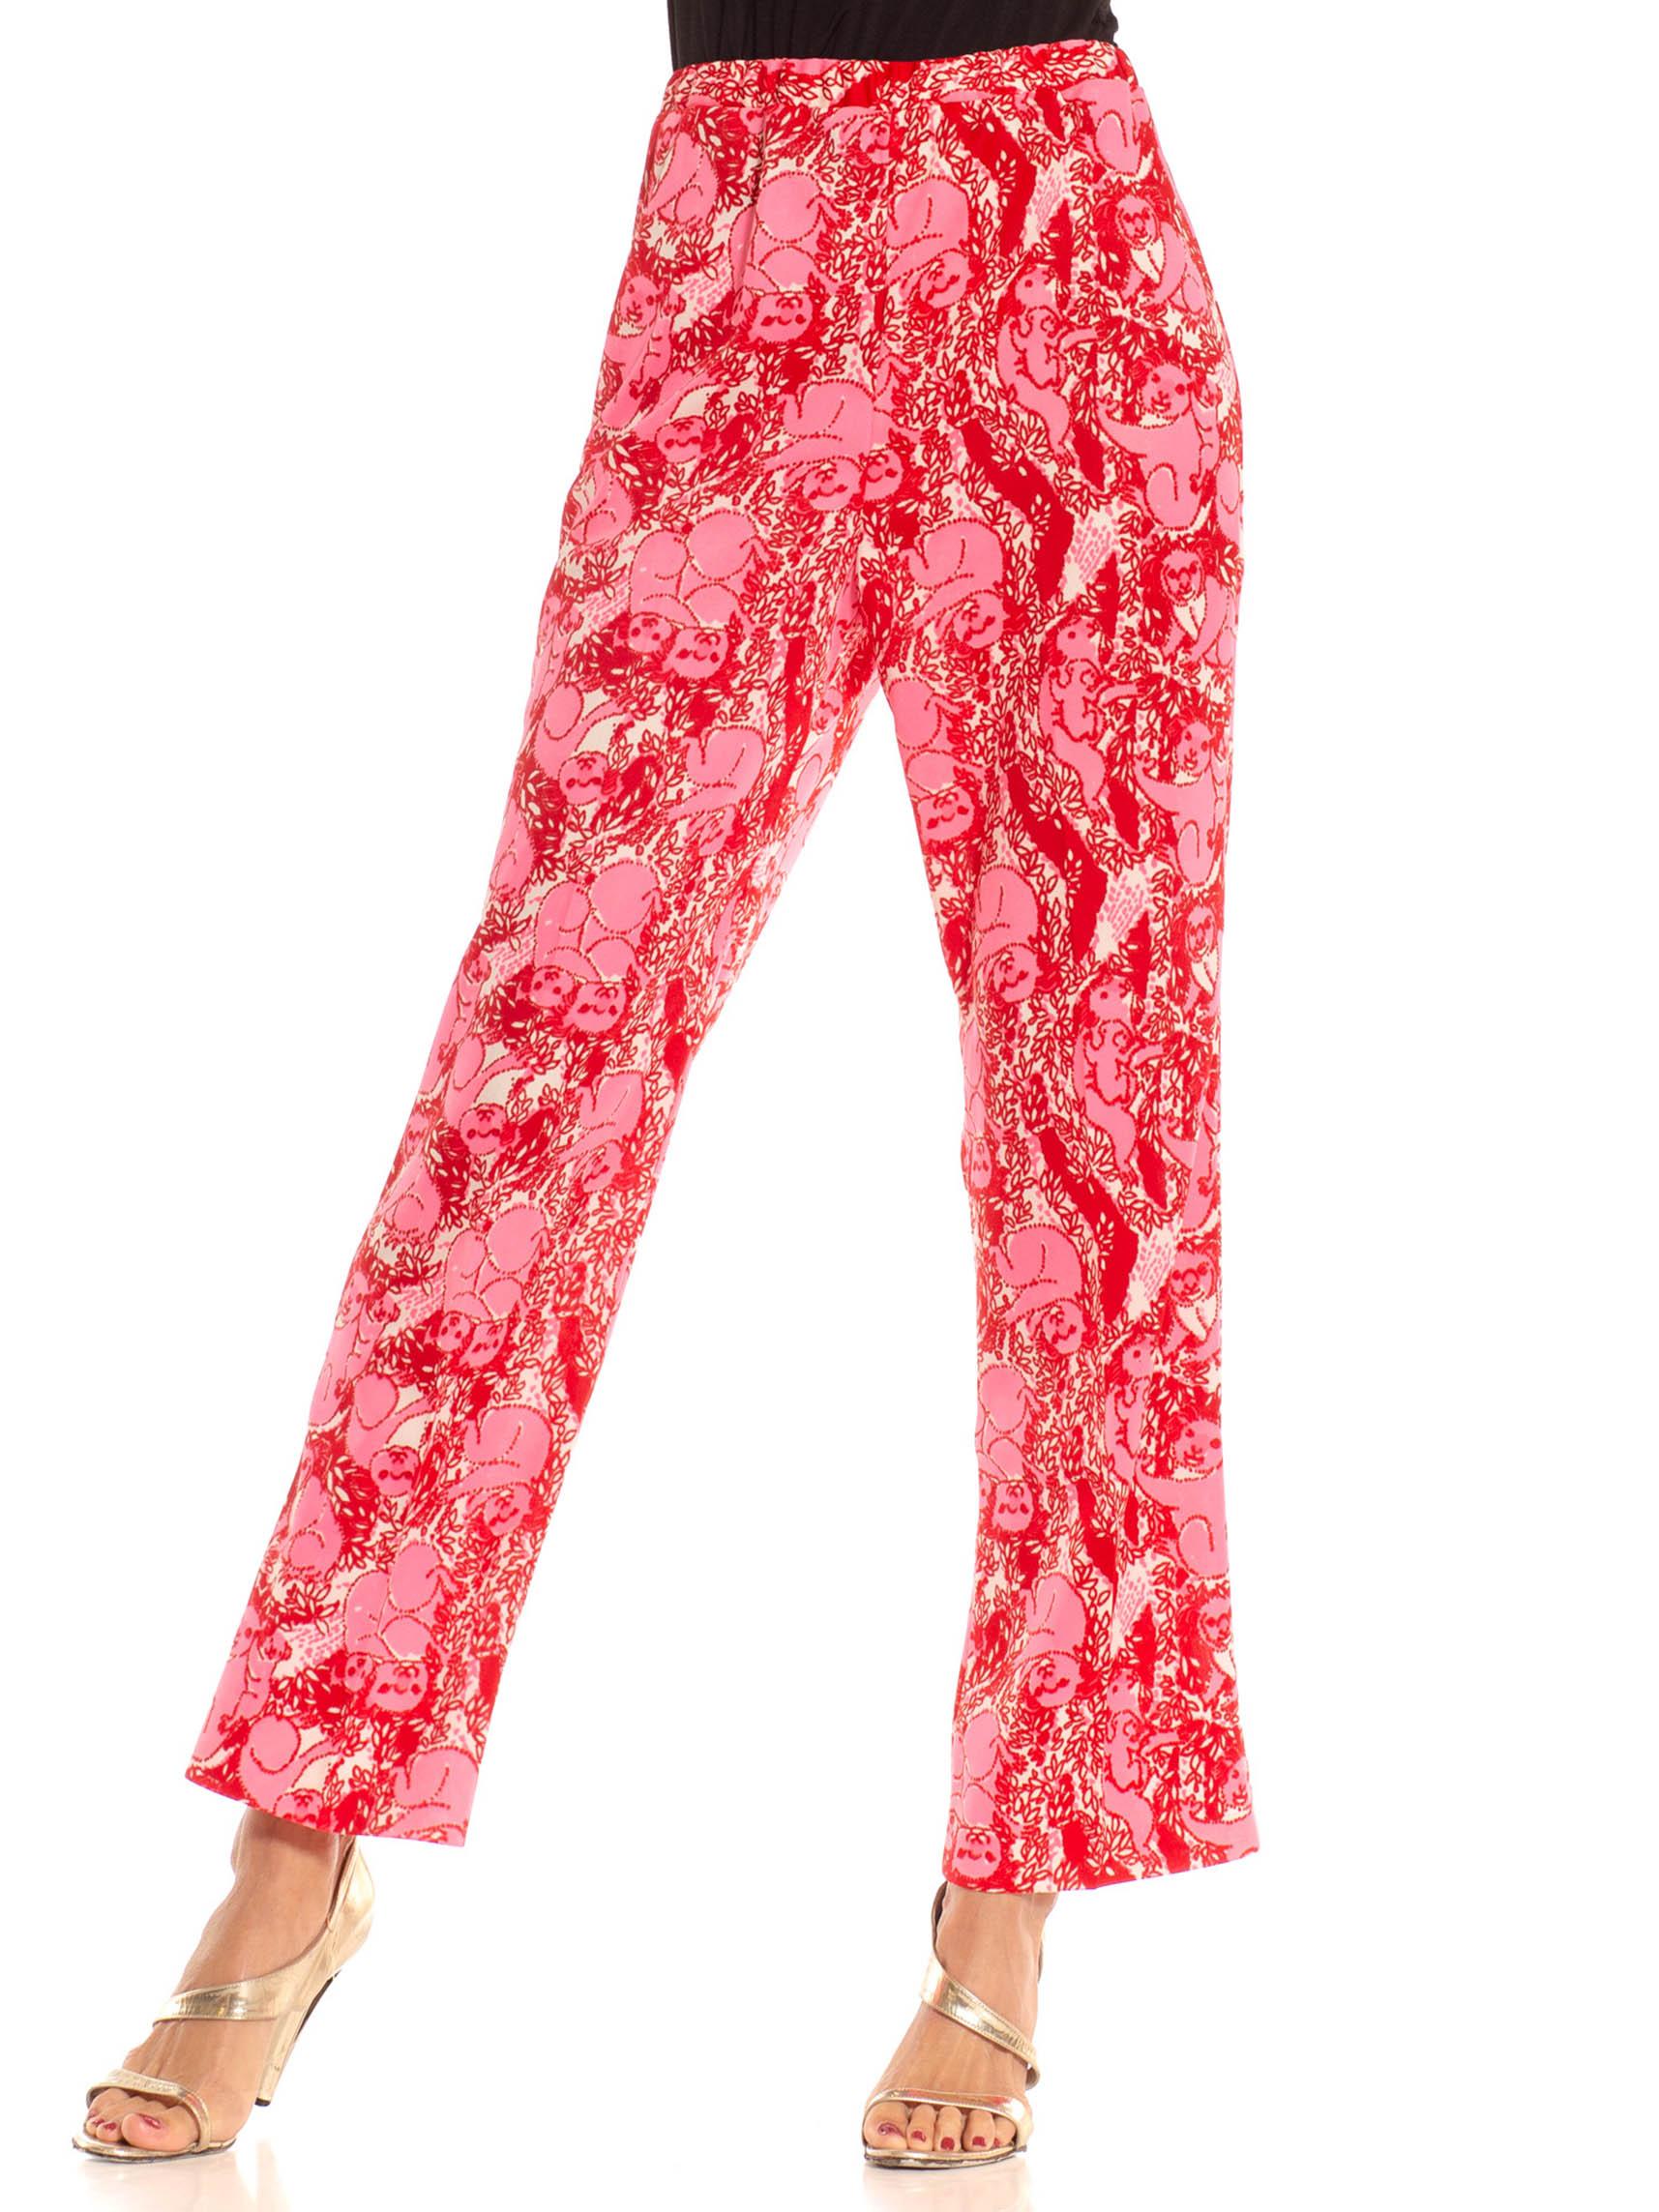 Women's 1970S Lilly Pulitzer Pink & Red Polyester Stretch Koala Print Pants